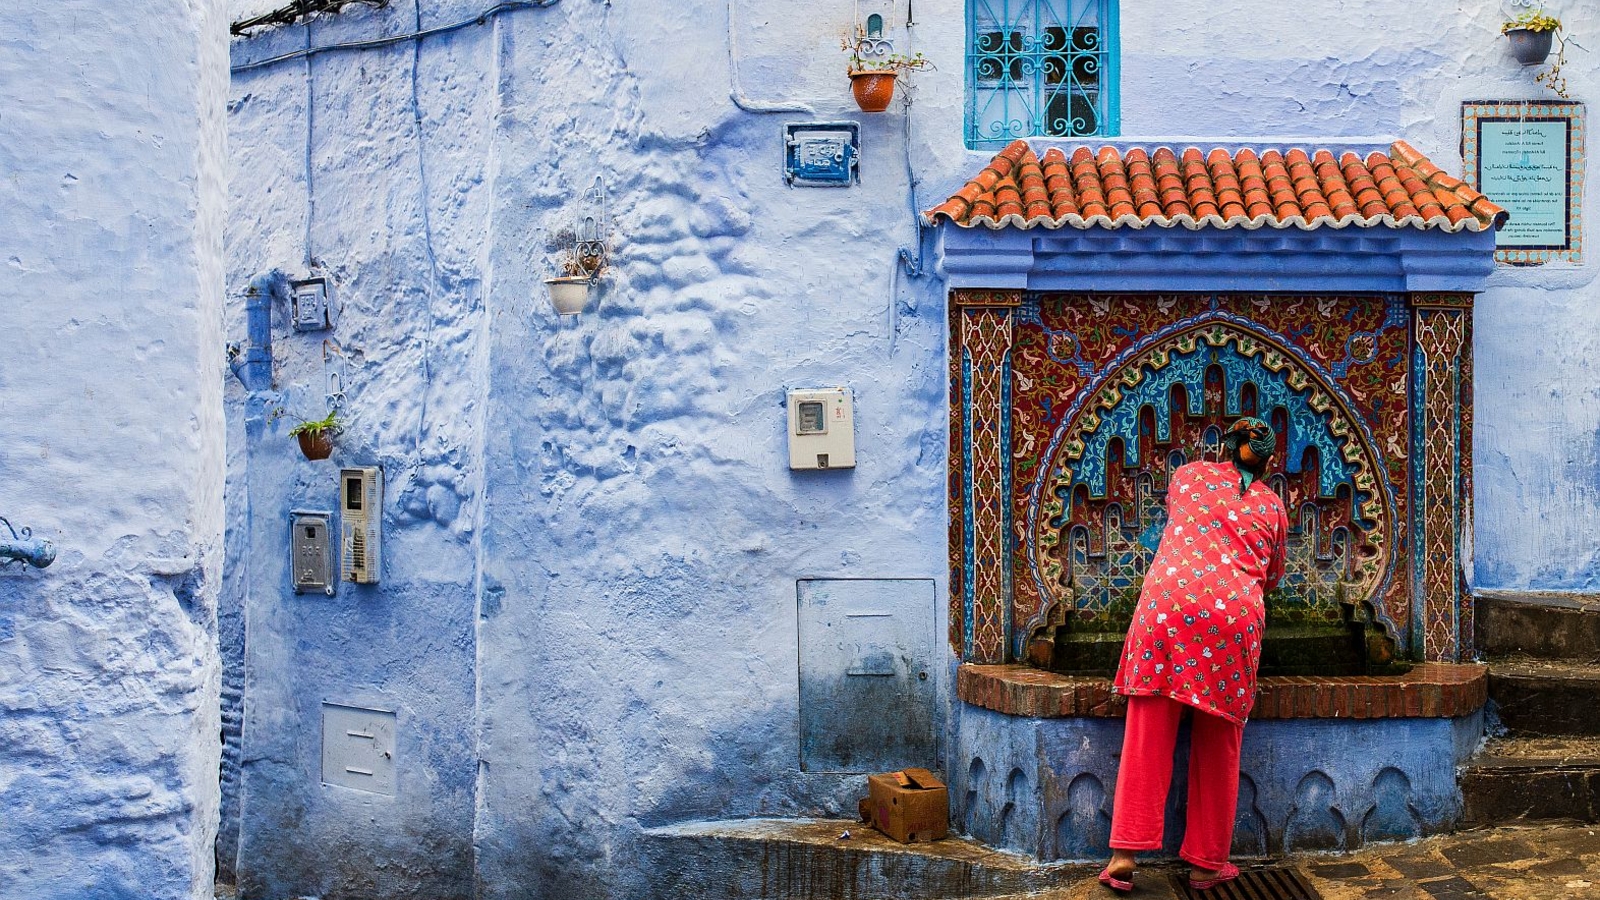 Woman collecting water from a fountain, Chefchaouen, Morocco. Photo: Miguel- AdobeStock.com